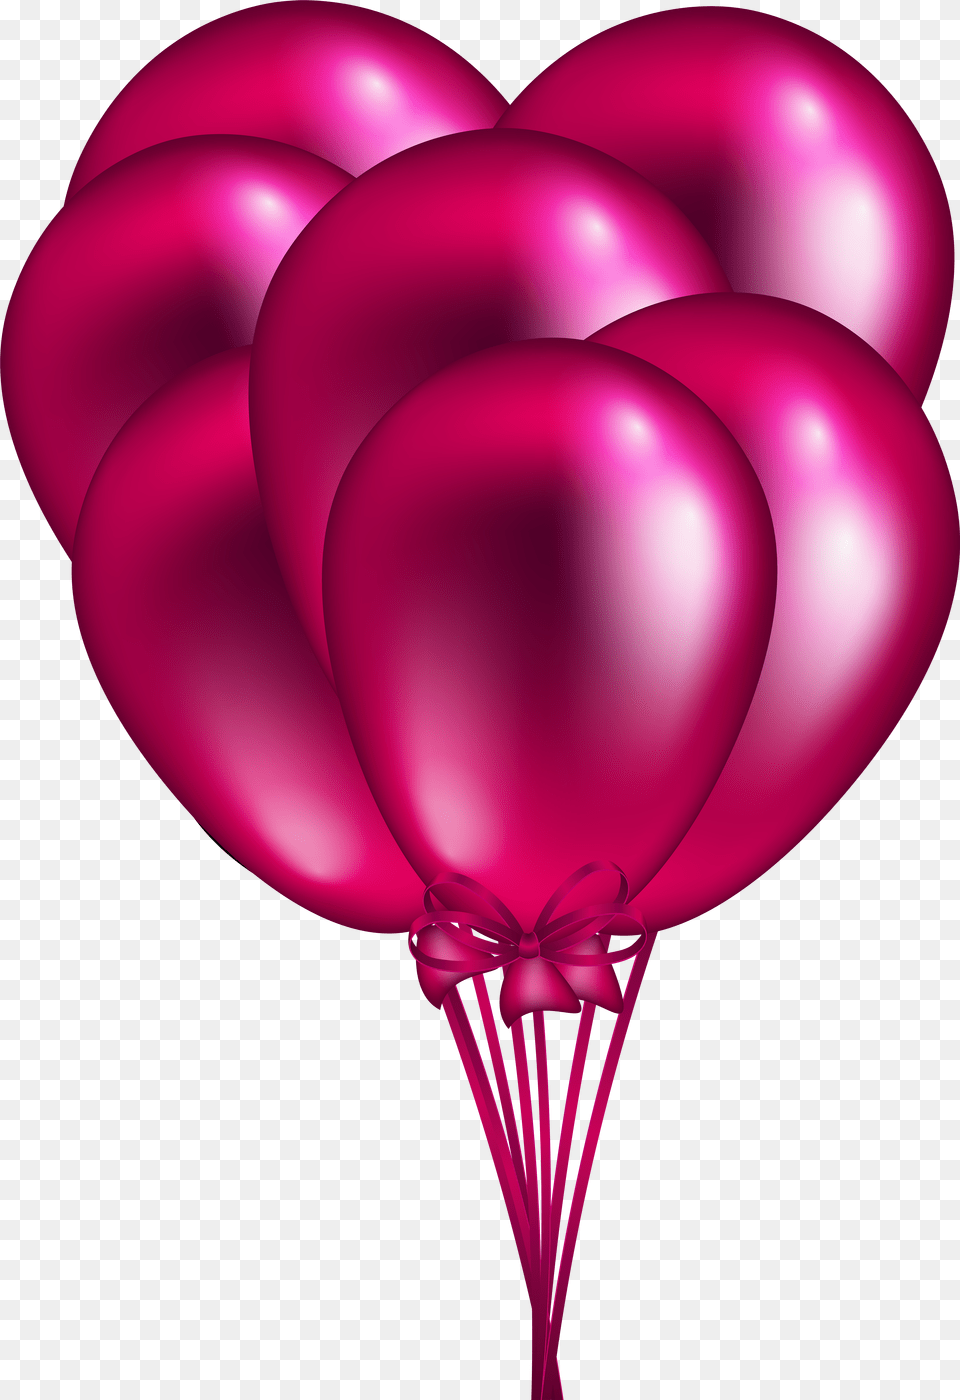 Pink Balloon Background Png Image